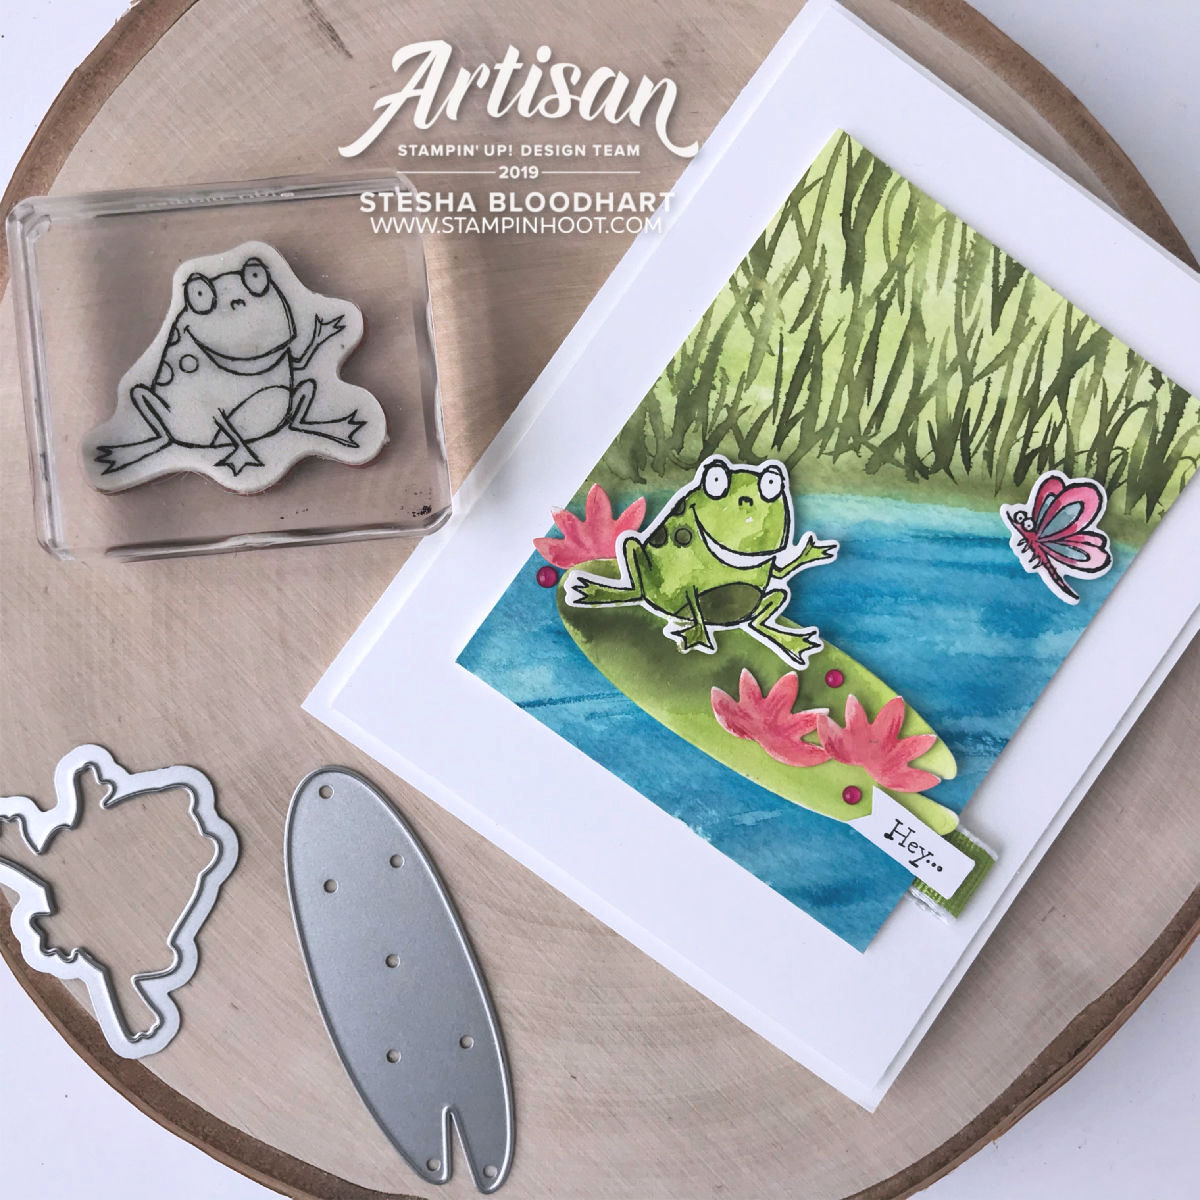 Hop Around Framelits Dies by Stampin' Up! coordinate with Sale-a-Bration Stamp Set So Hoppy Together.  Cards created by 2019 Artisan Design Team Member #steshabloodhart #stampinhoot #2019artisandesignteam